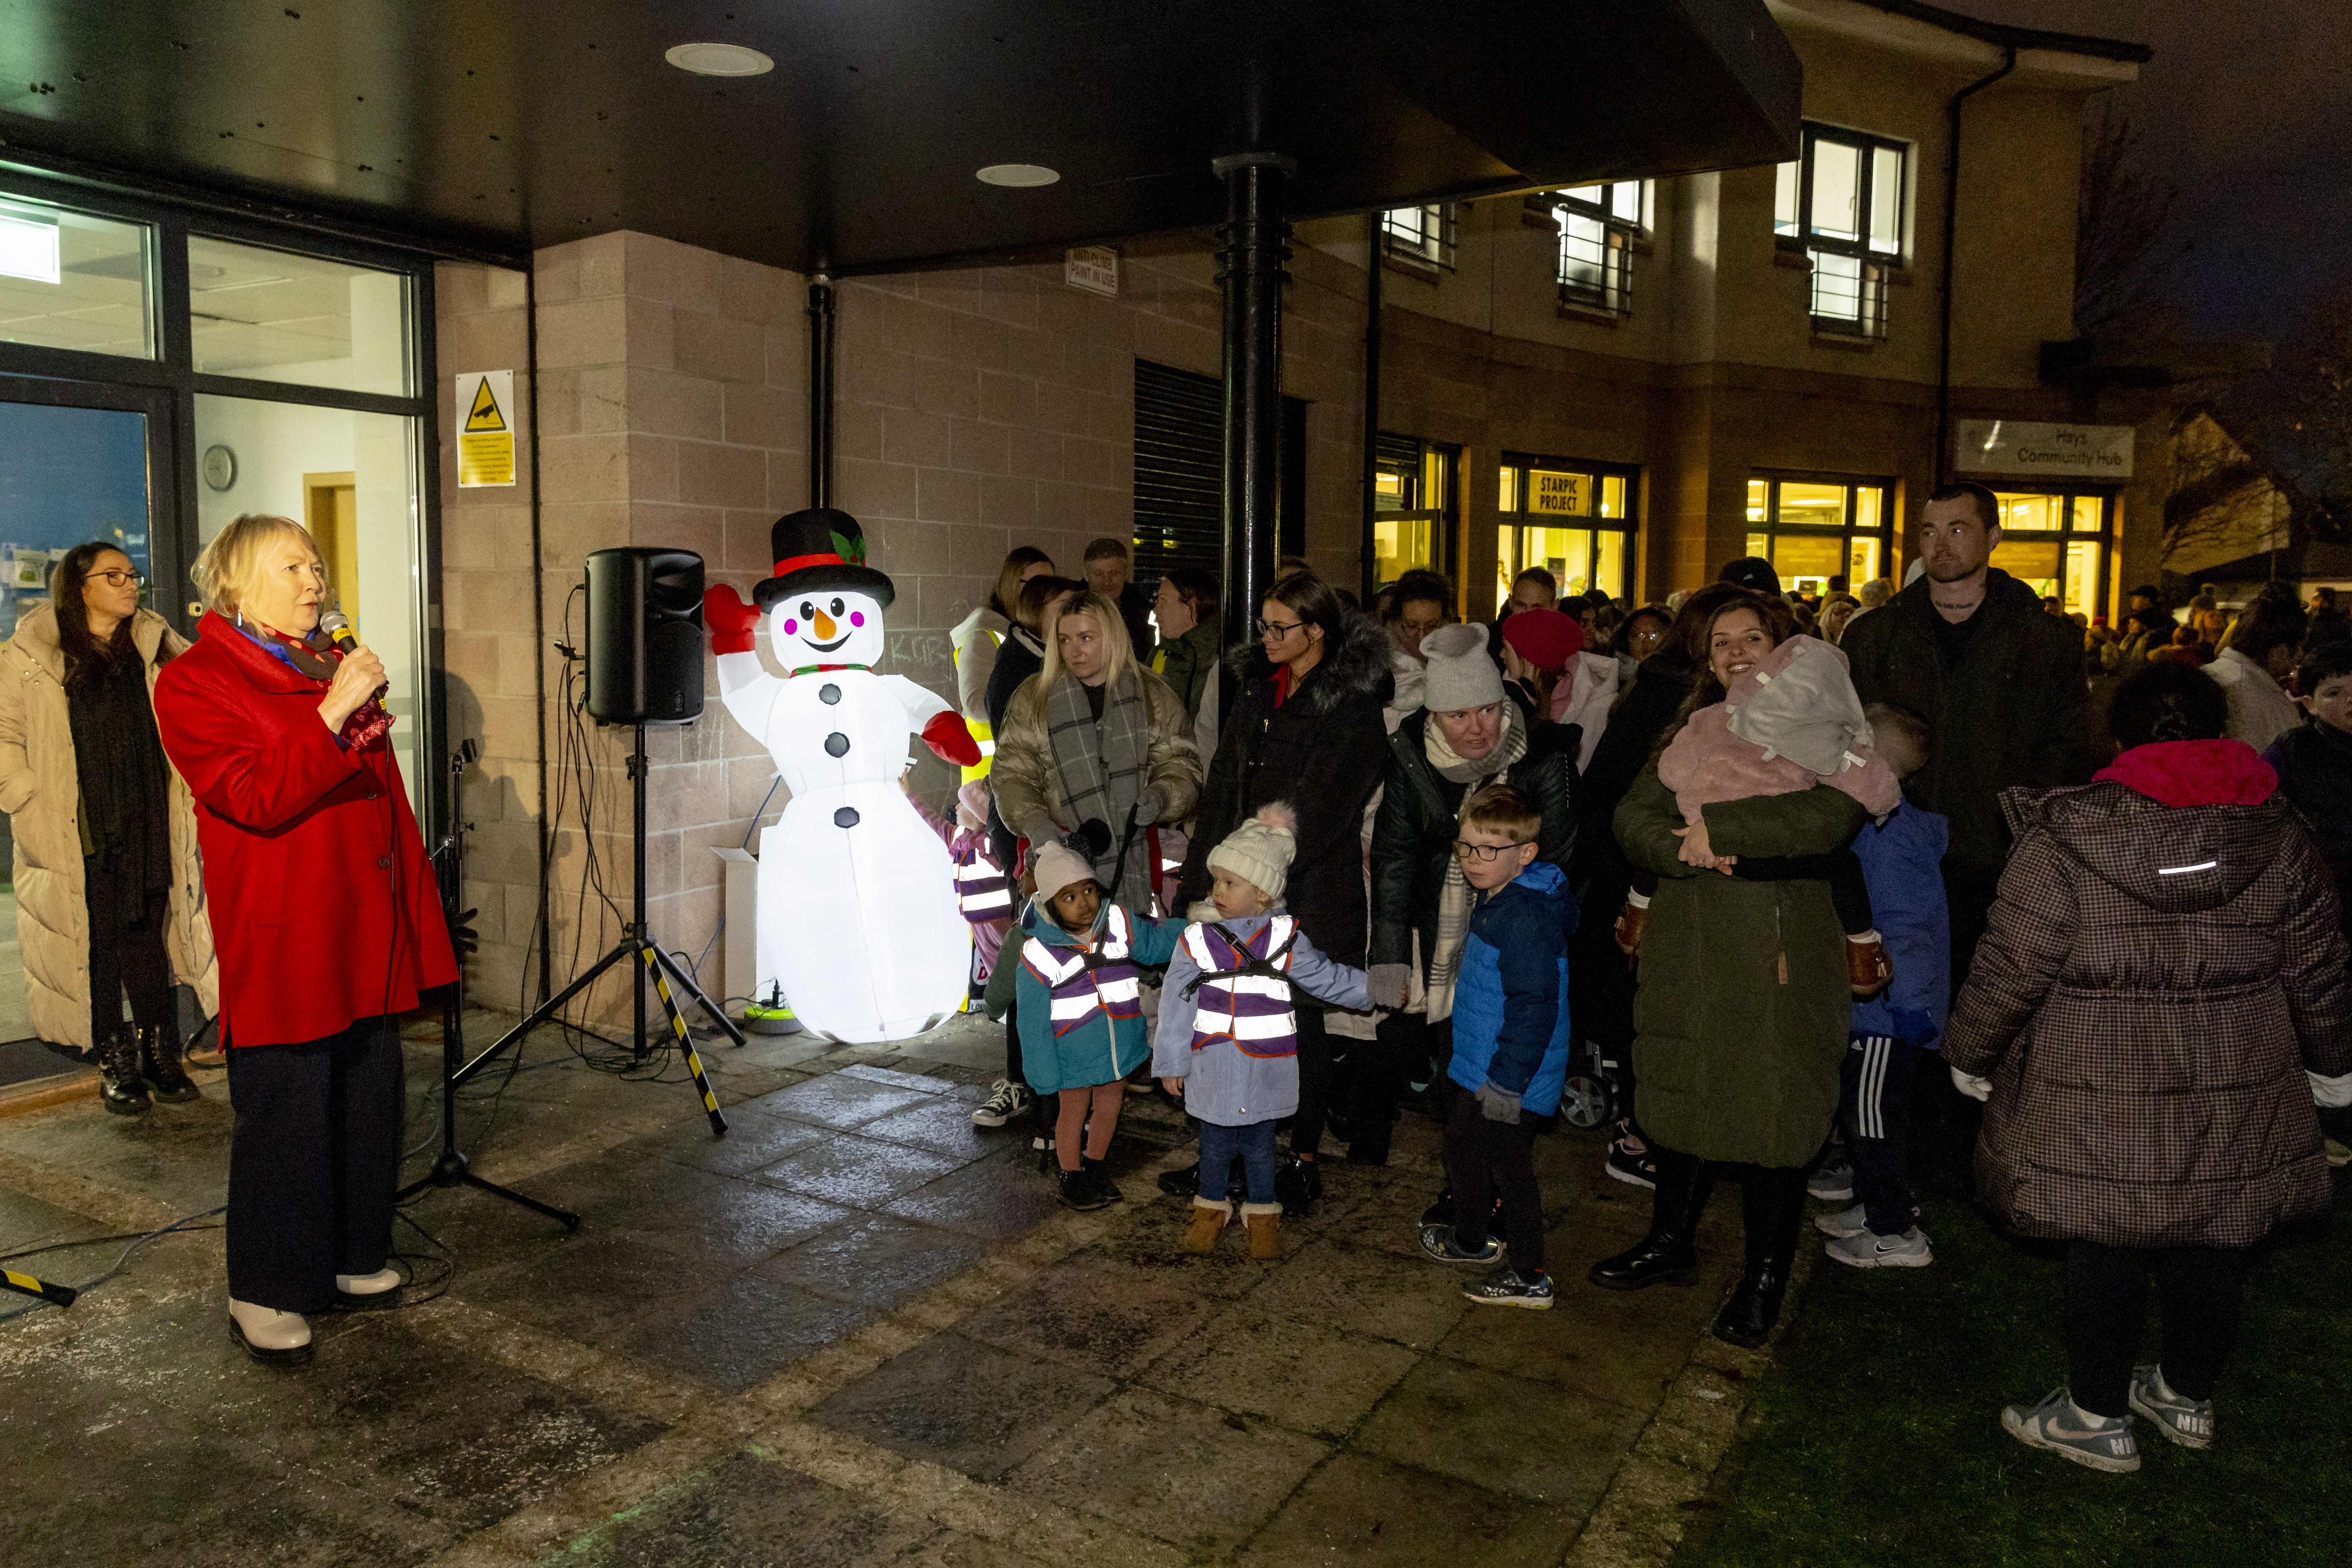 Santa visits Craigmillar and Niddrie Christmas light switch-on to spread community cheer